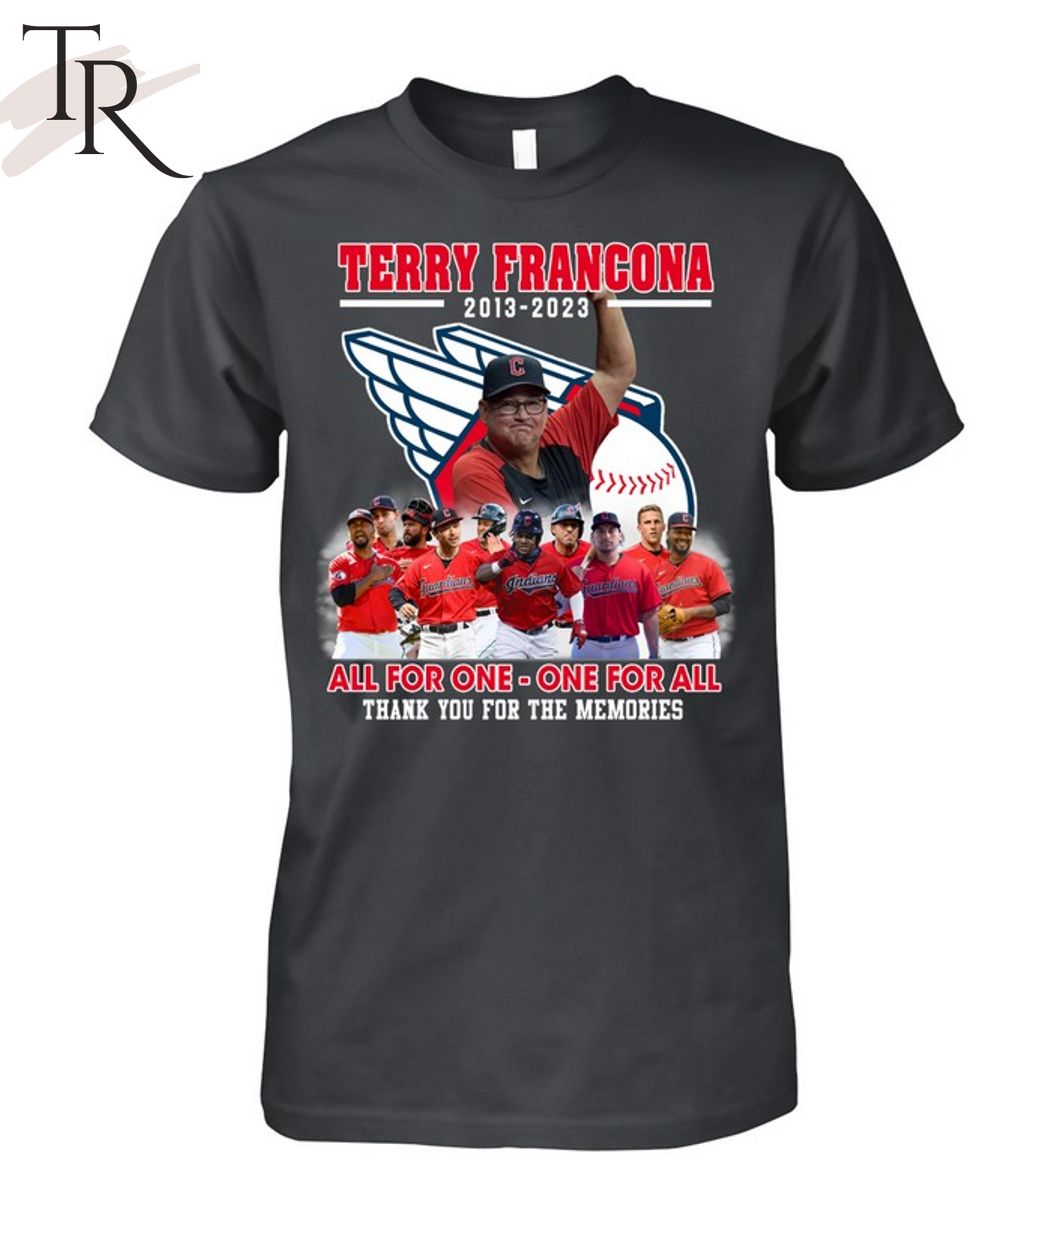 Legends Boston Red Sox Thank You For The Memories T-Shirt - Torunstyle